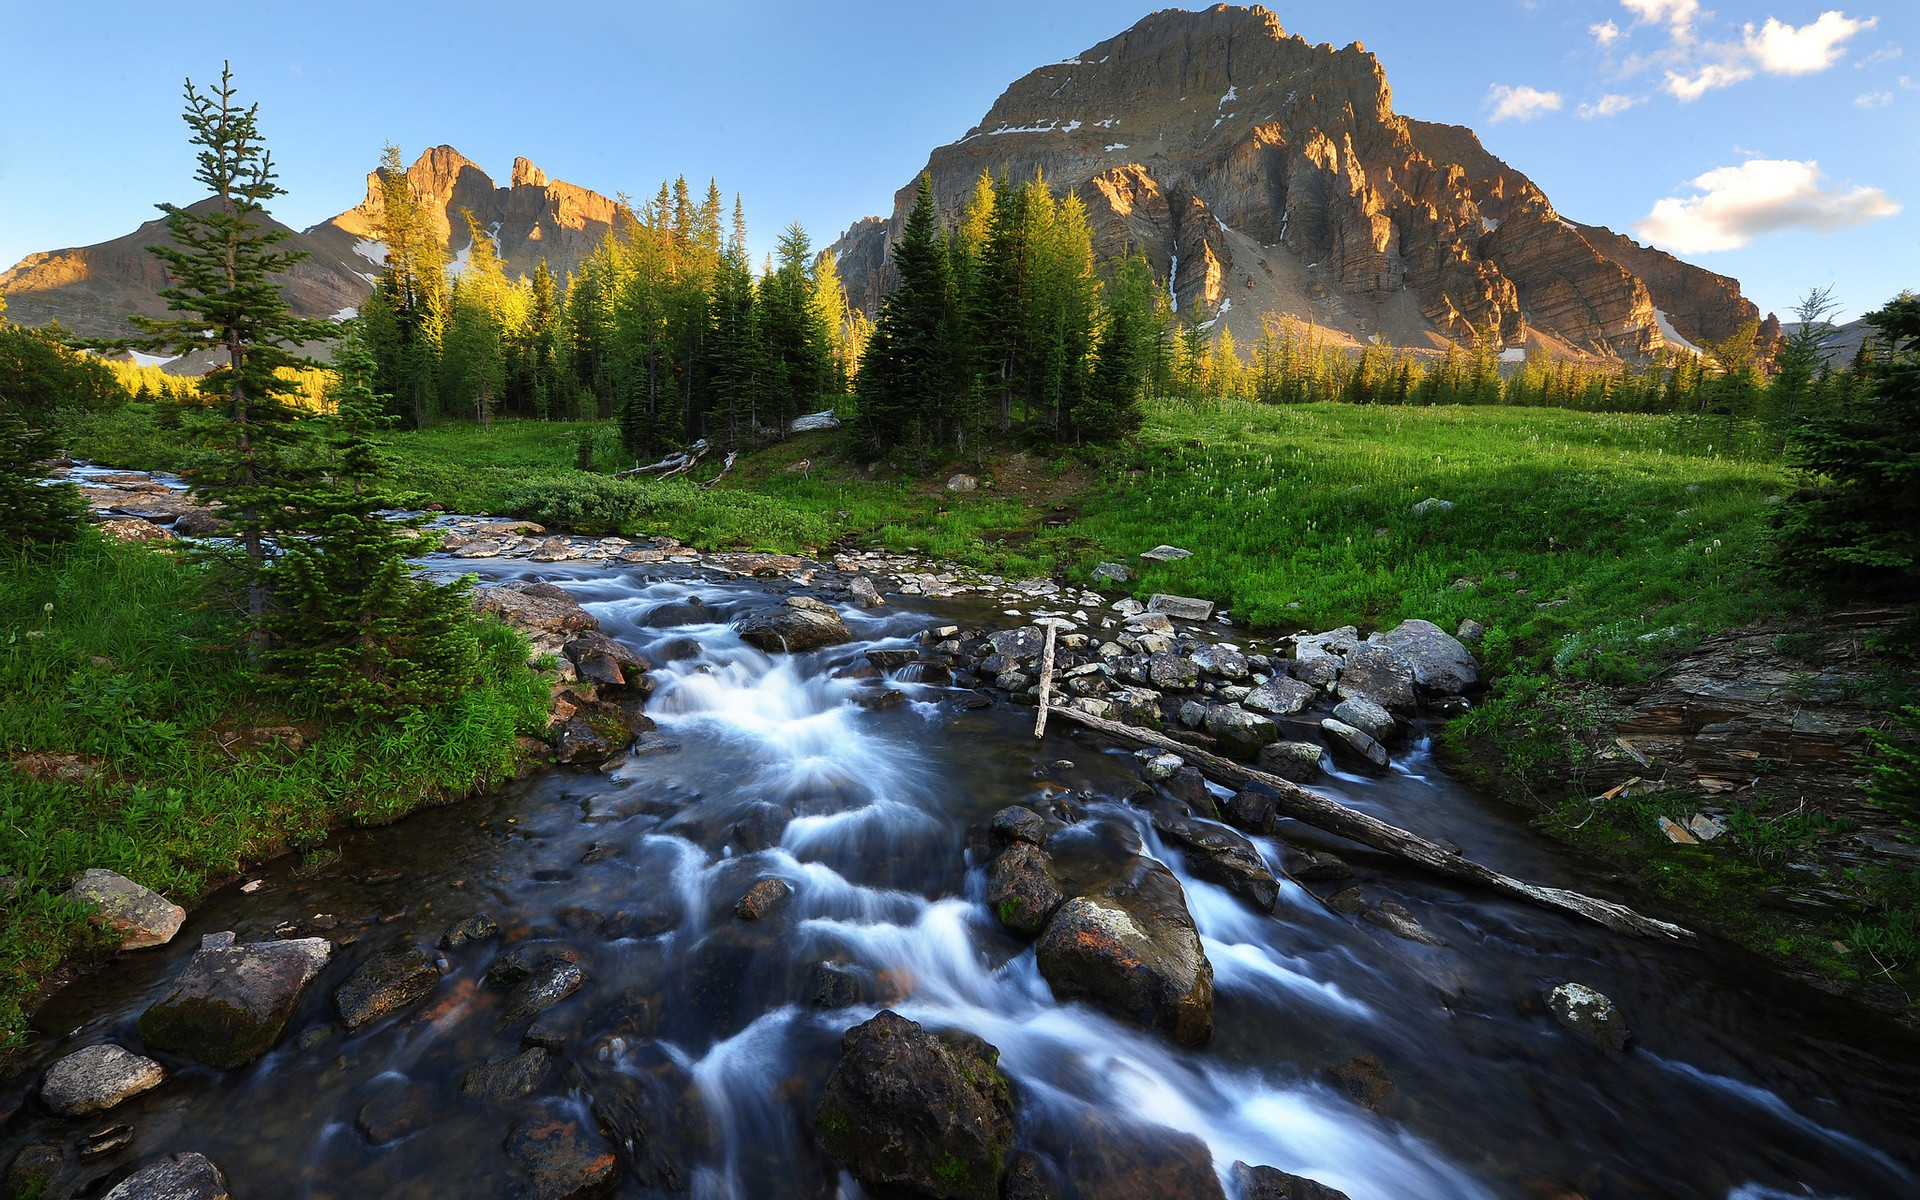 Summer picture of a mountainous shallow river